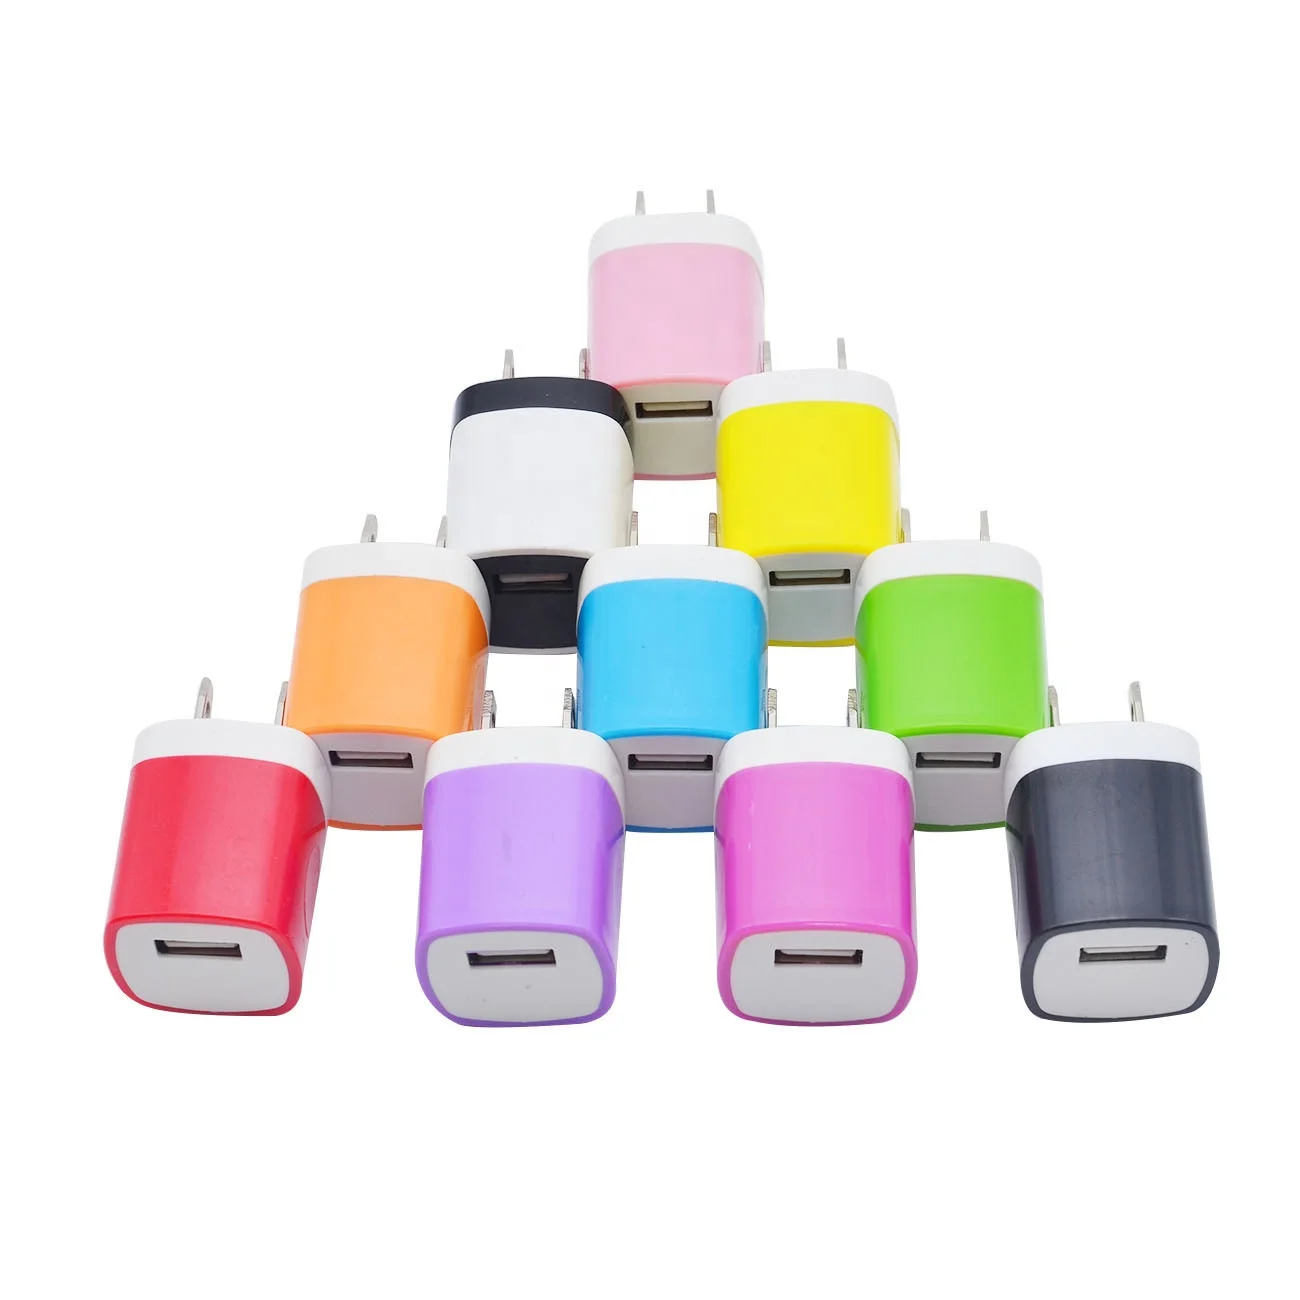 

Amazon Top Seller Fast Charging Block Travel Single Usb Wall Phone Charger Brick Cube Charger For iPhone, 9 colors